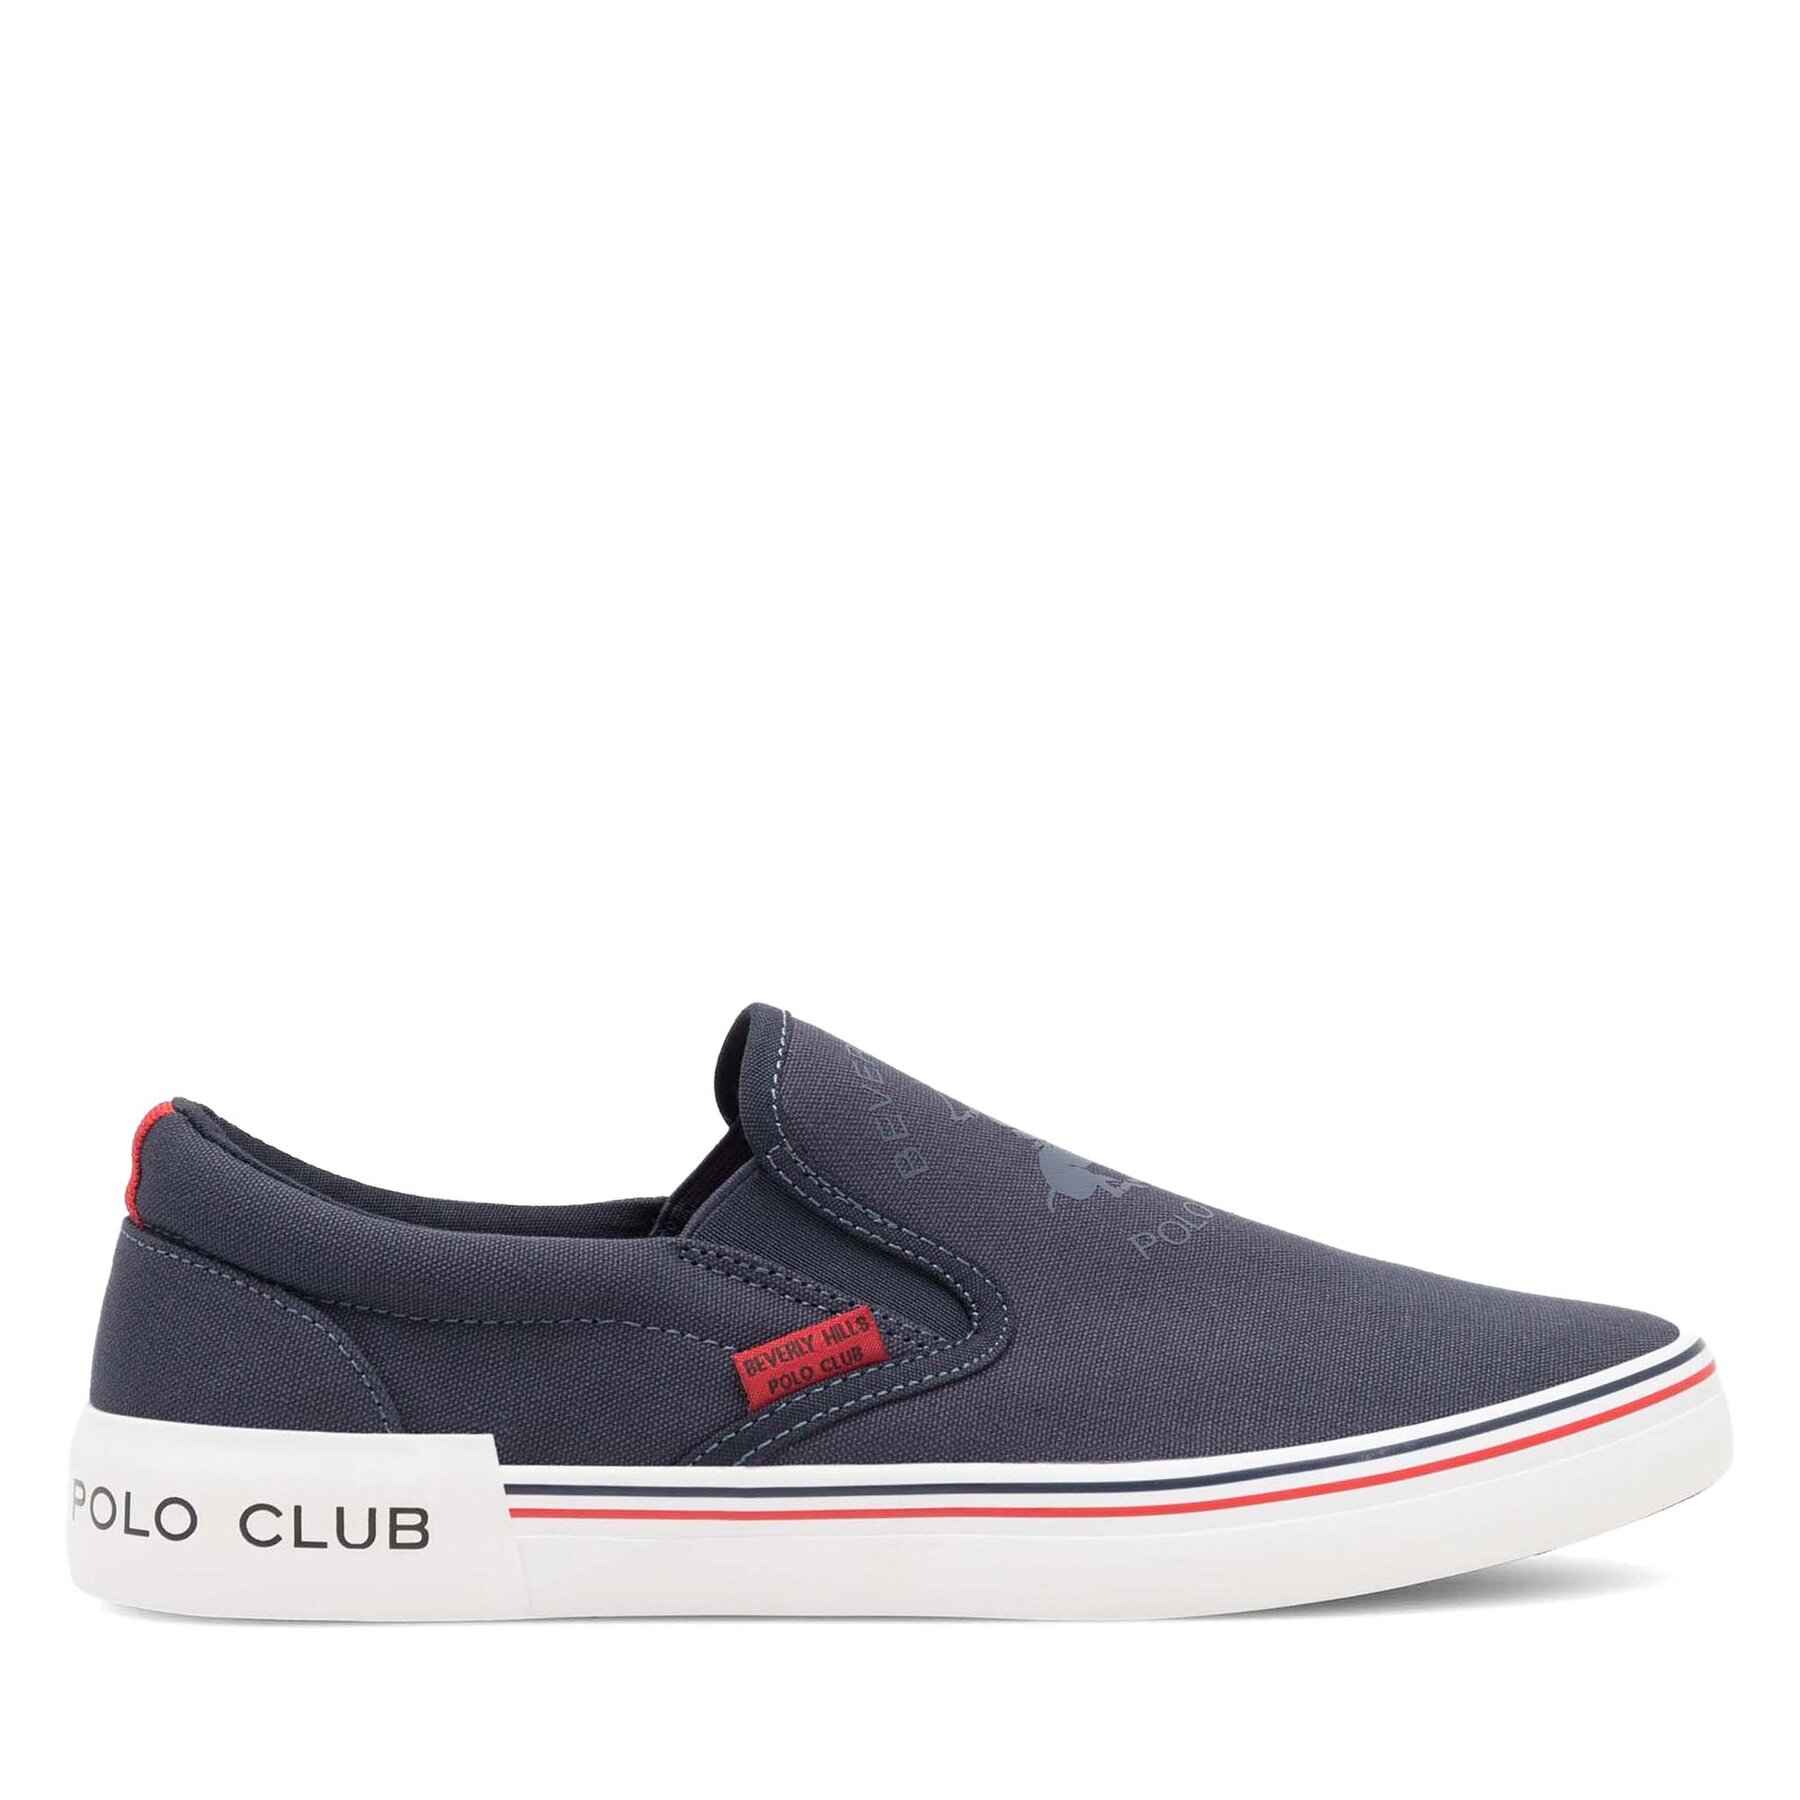 Sneakers aus Stoff Beverly Hills Polo Club BHPC025M Dunkelblau von Beverly Hills Polo Club